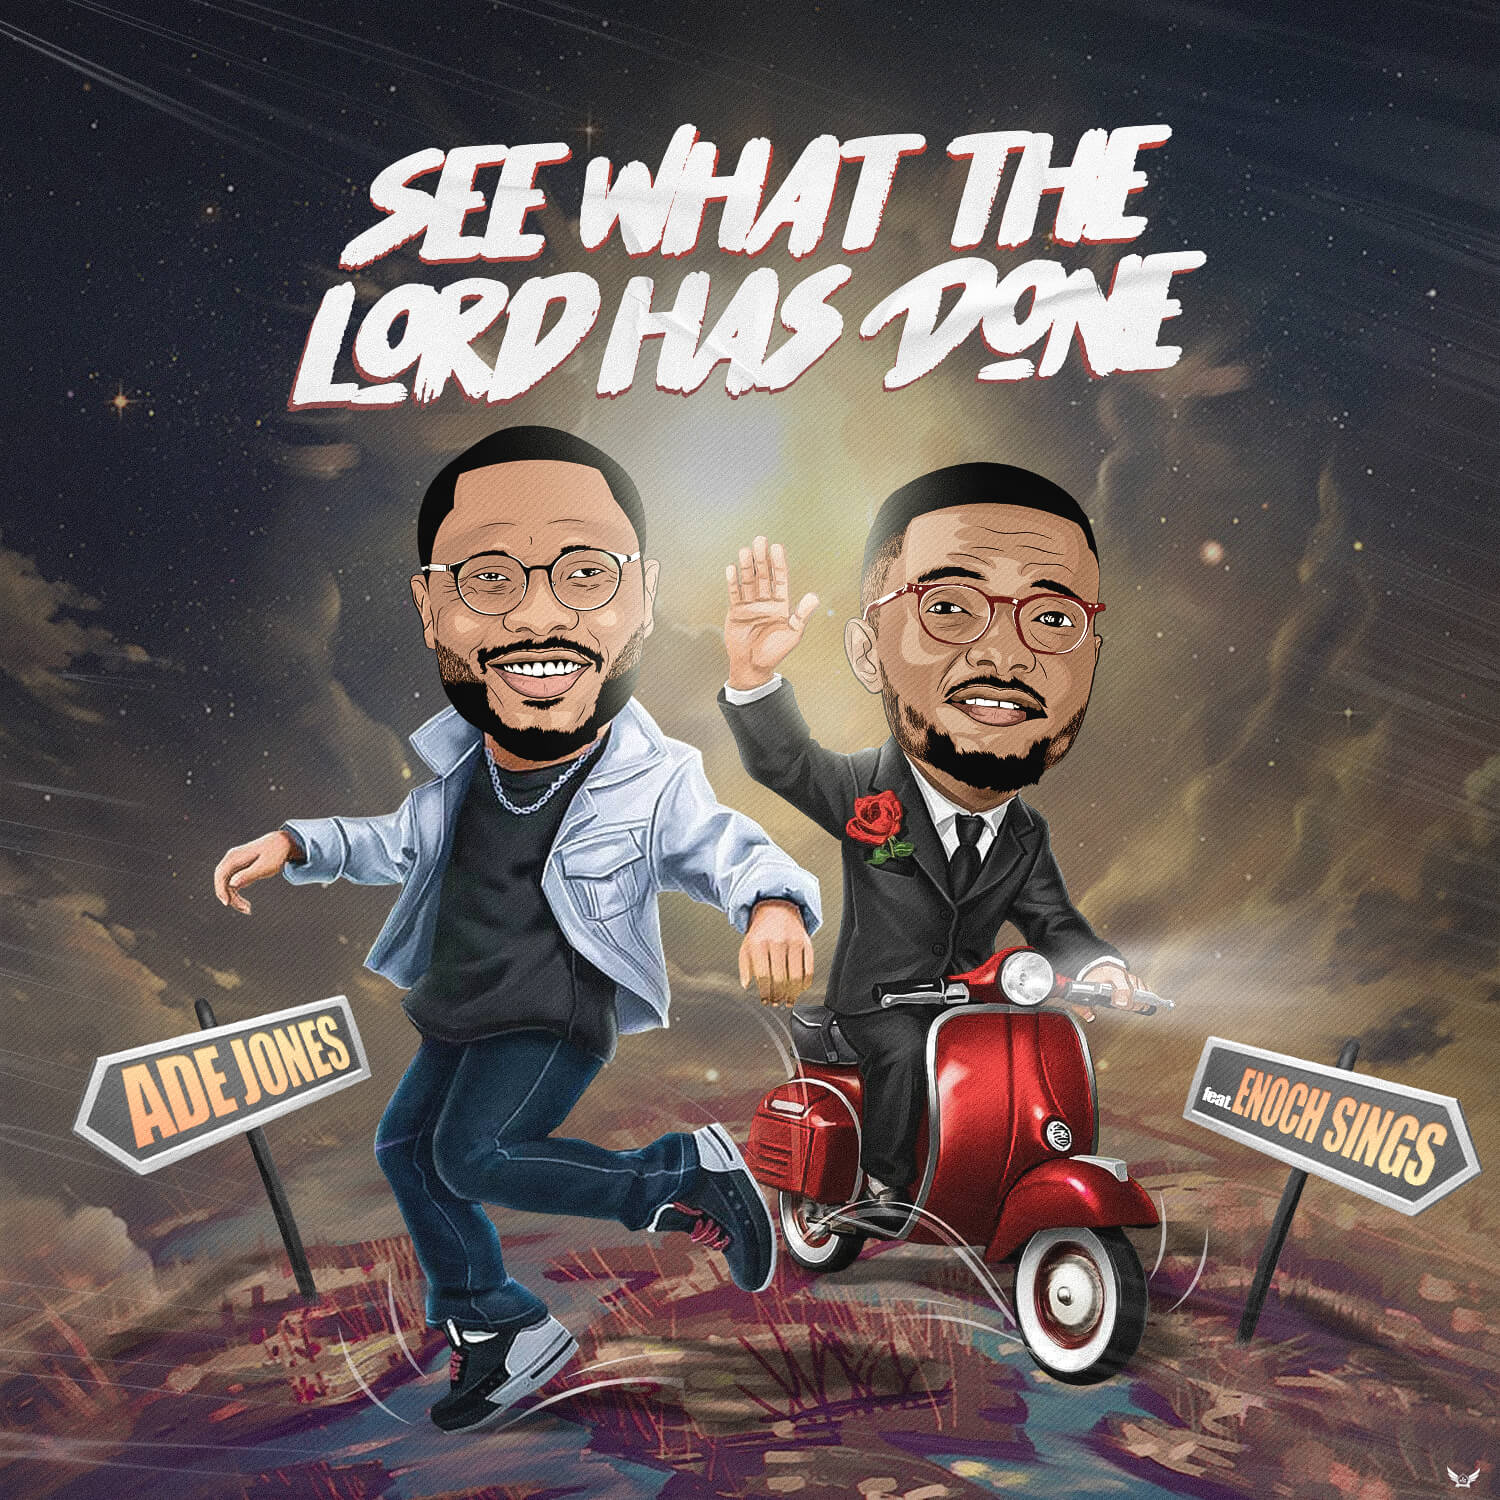 Ade Jones - Look What The Lord Has Done ft Enoch Sings